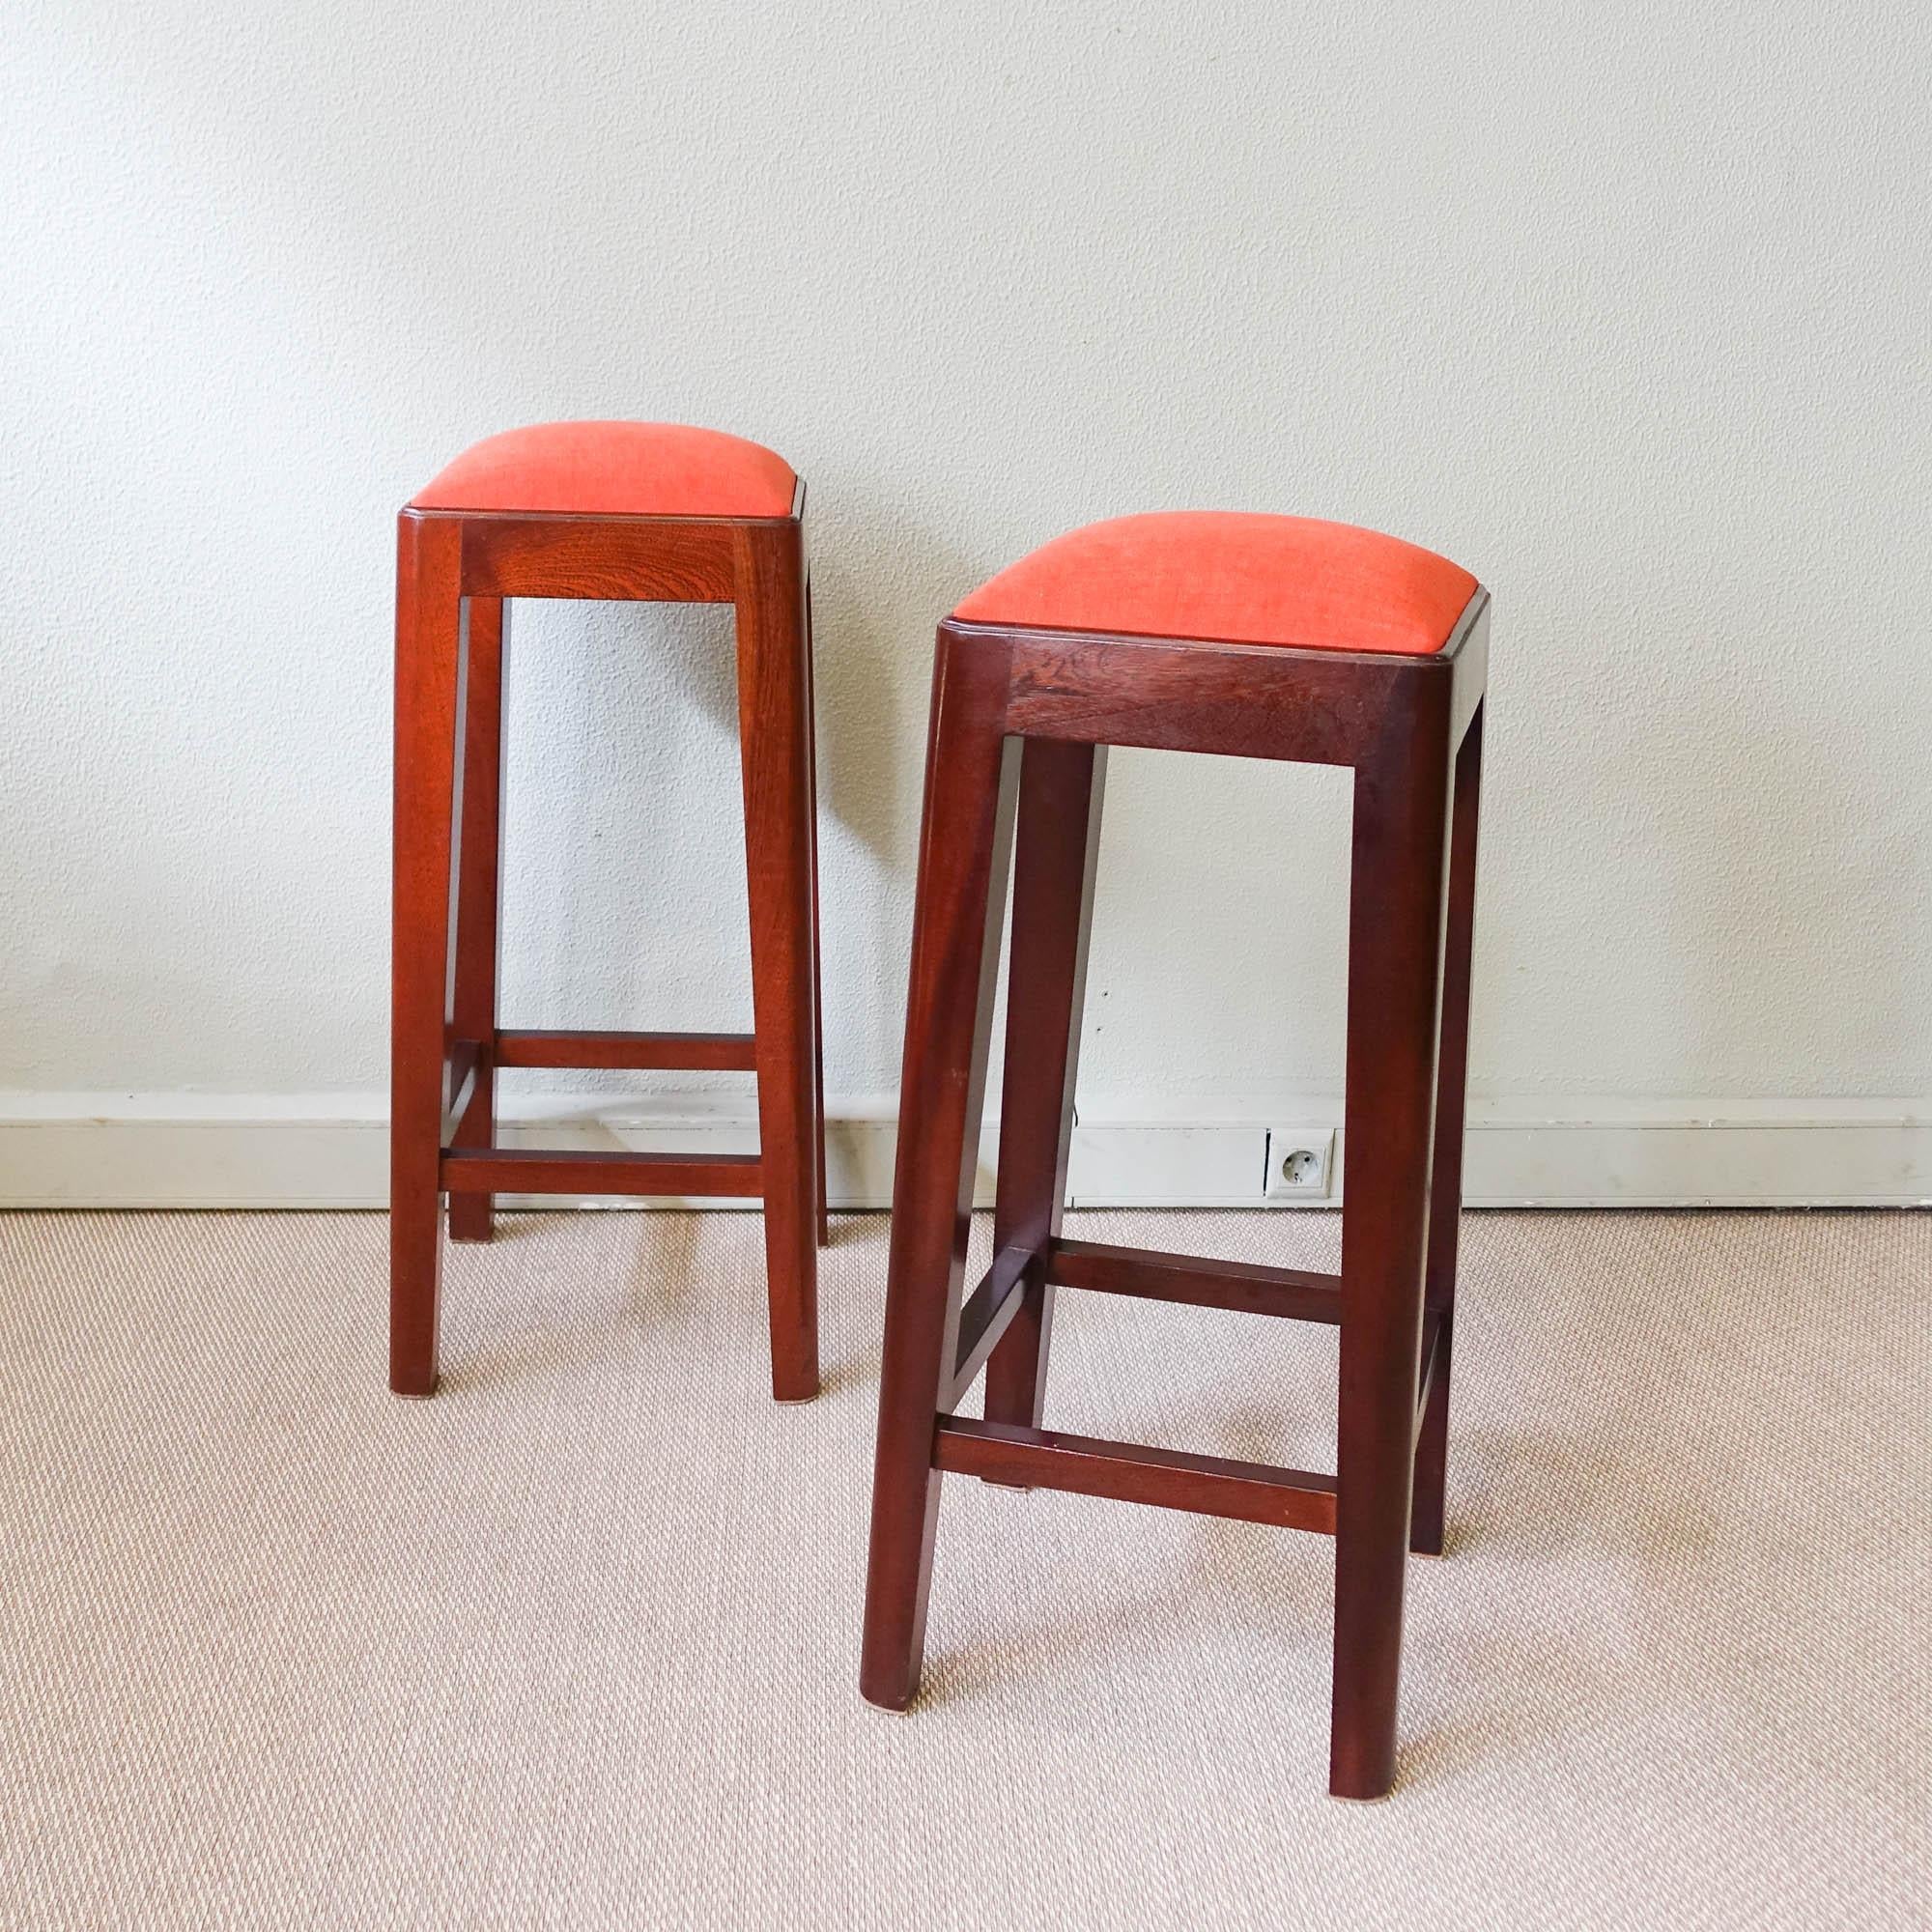 Pair of Vintage Portuguese High Stools, 1960's For Sale 2